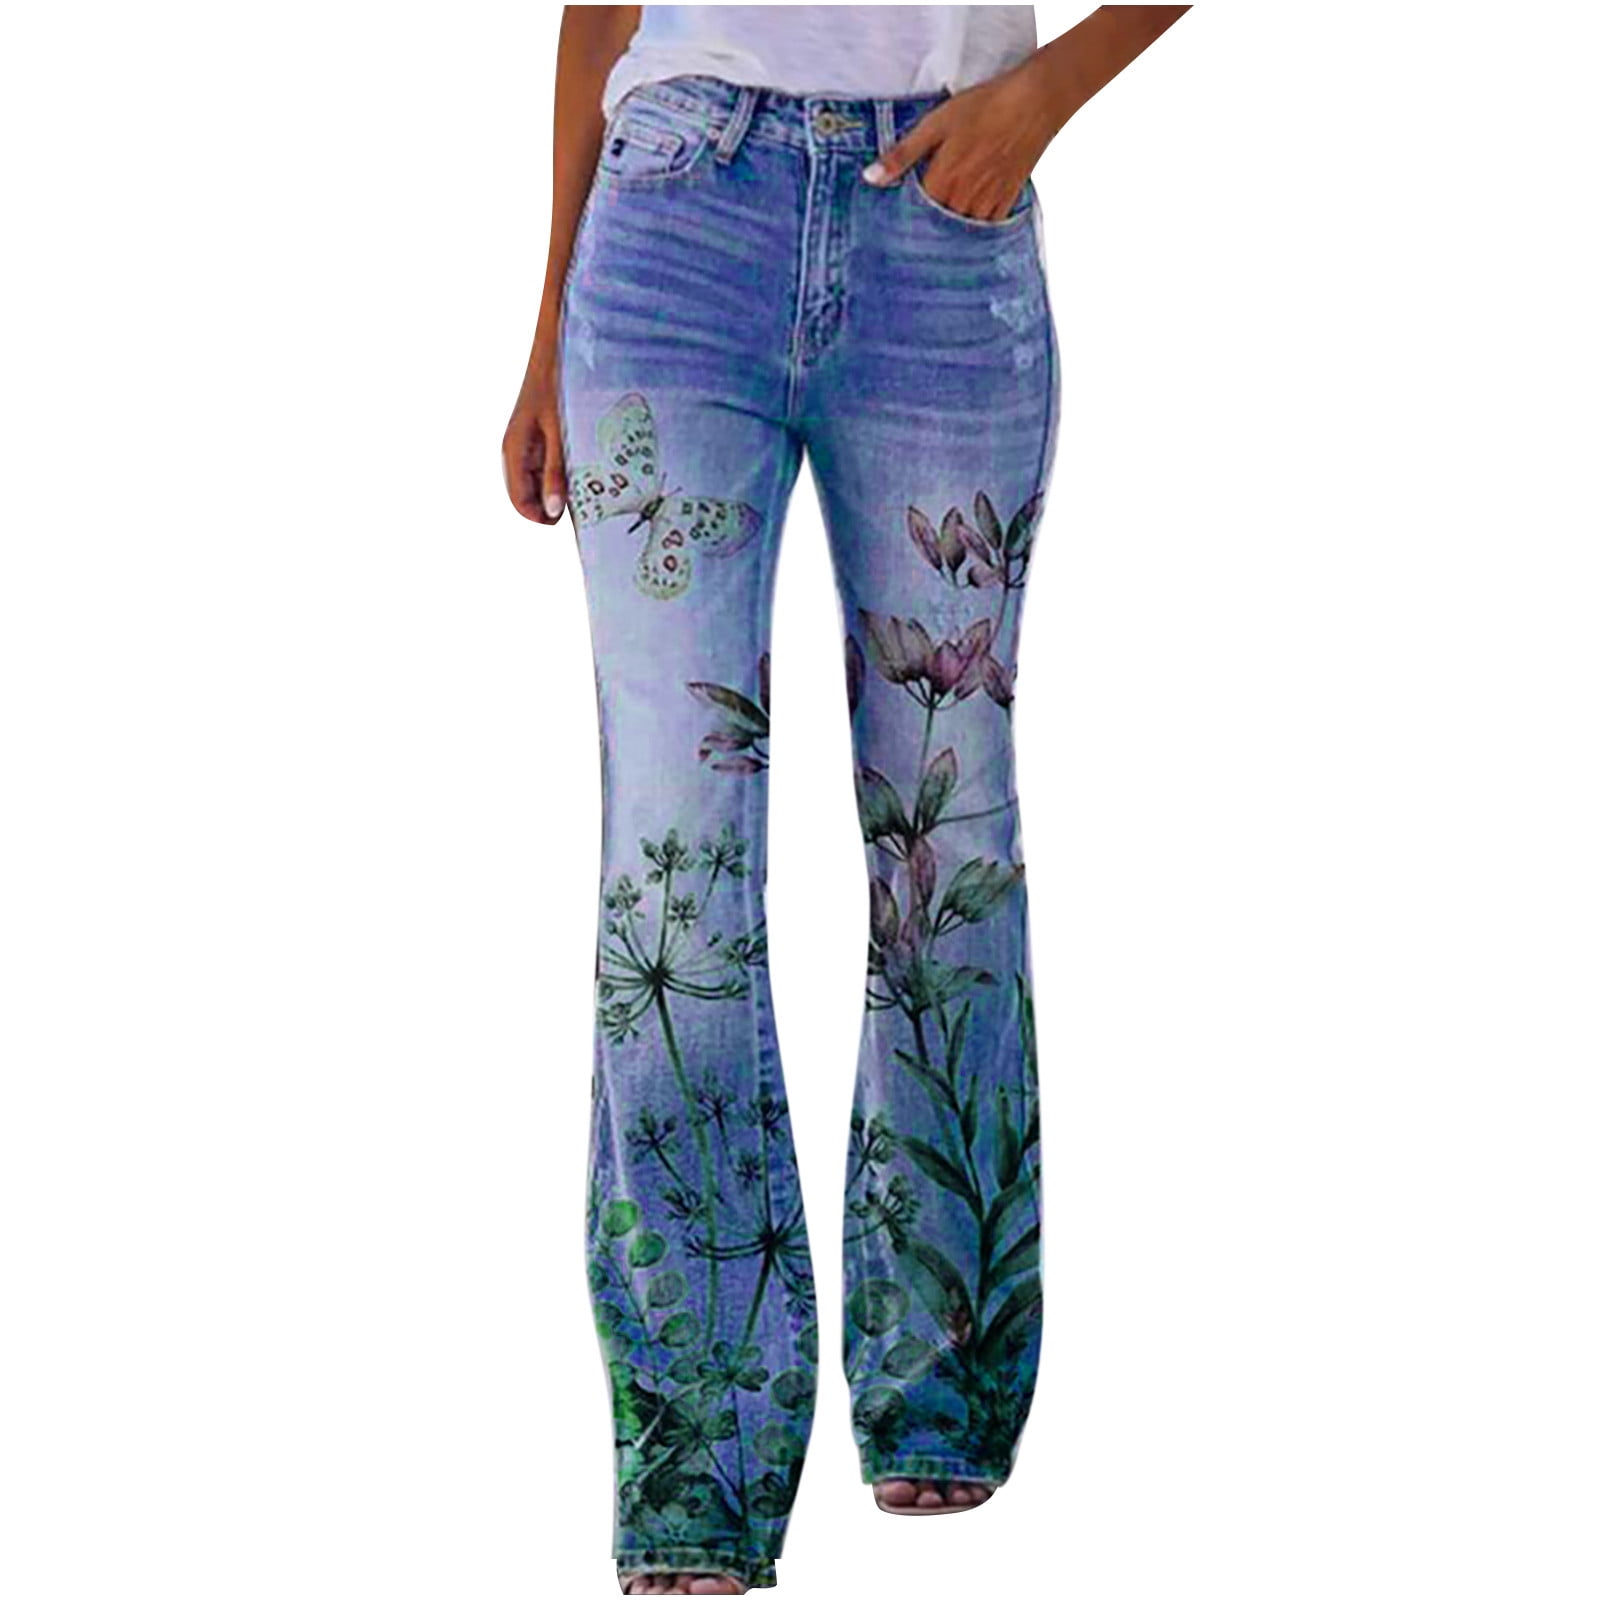 2023 Womens Bell Bottom Stretchy Jeans Floral Printed High Waist Flare Jean  Denim Skinny Pants Bootcut Trousers 